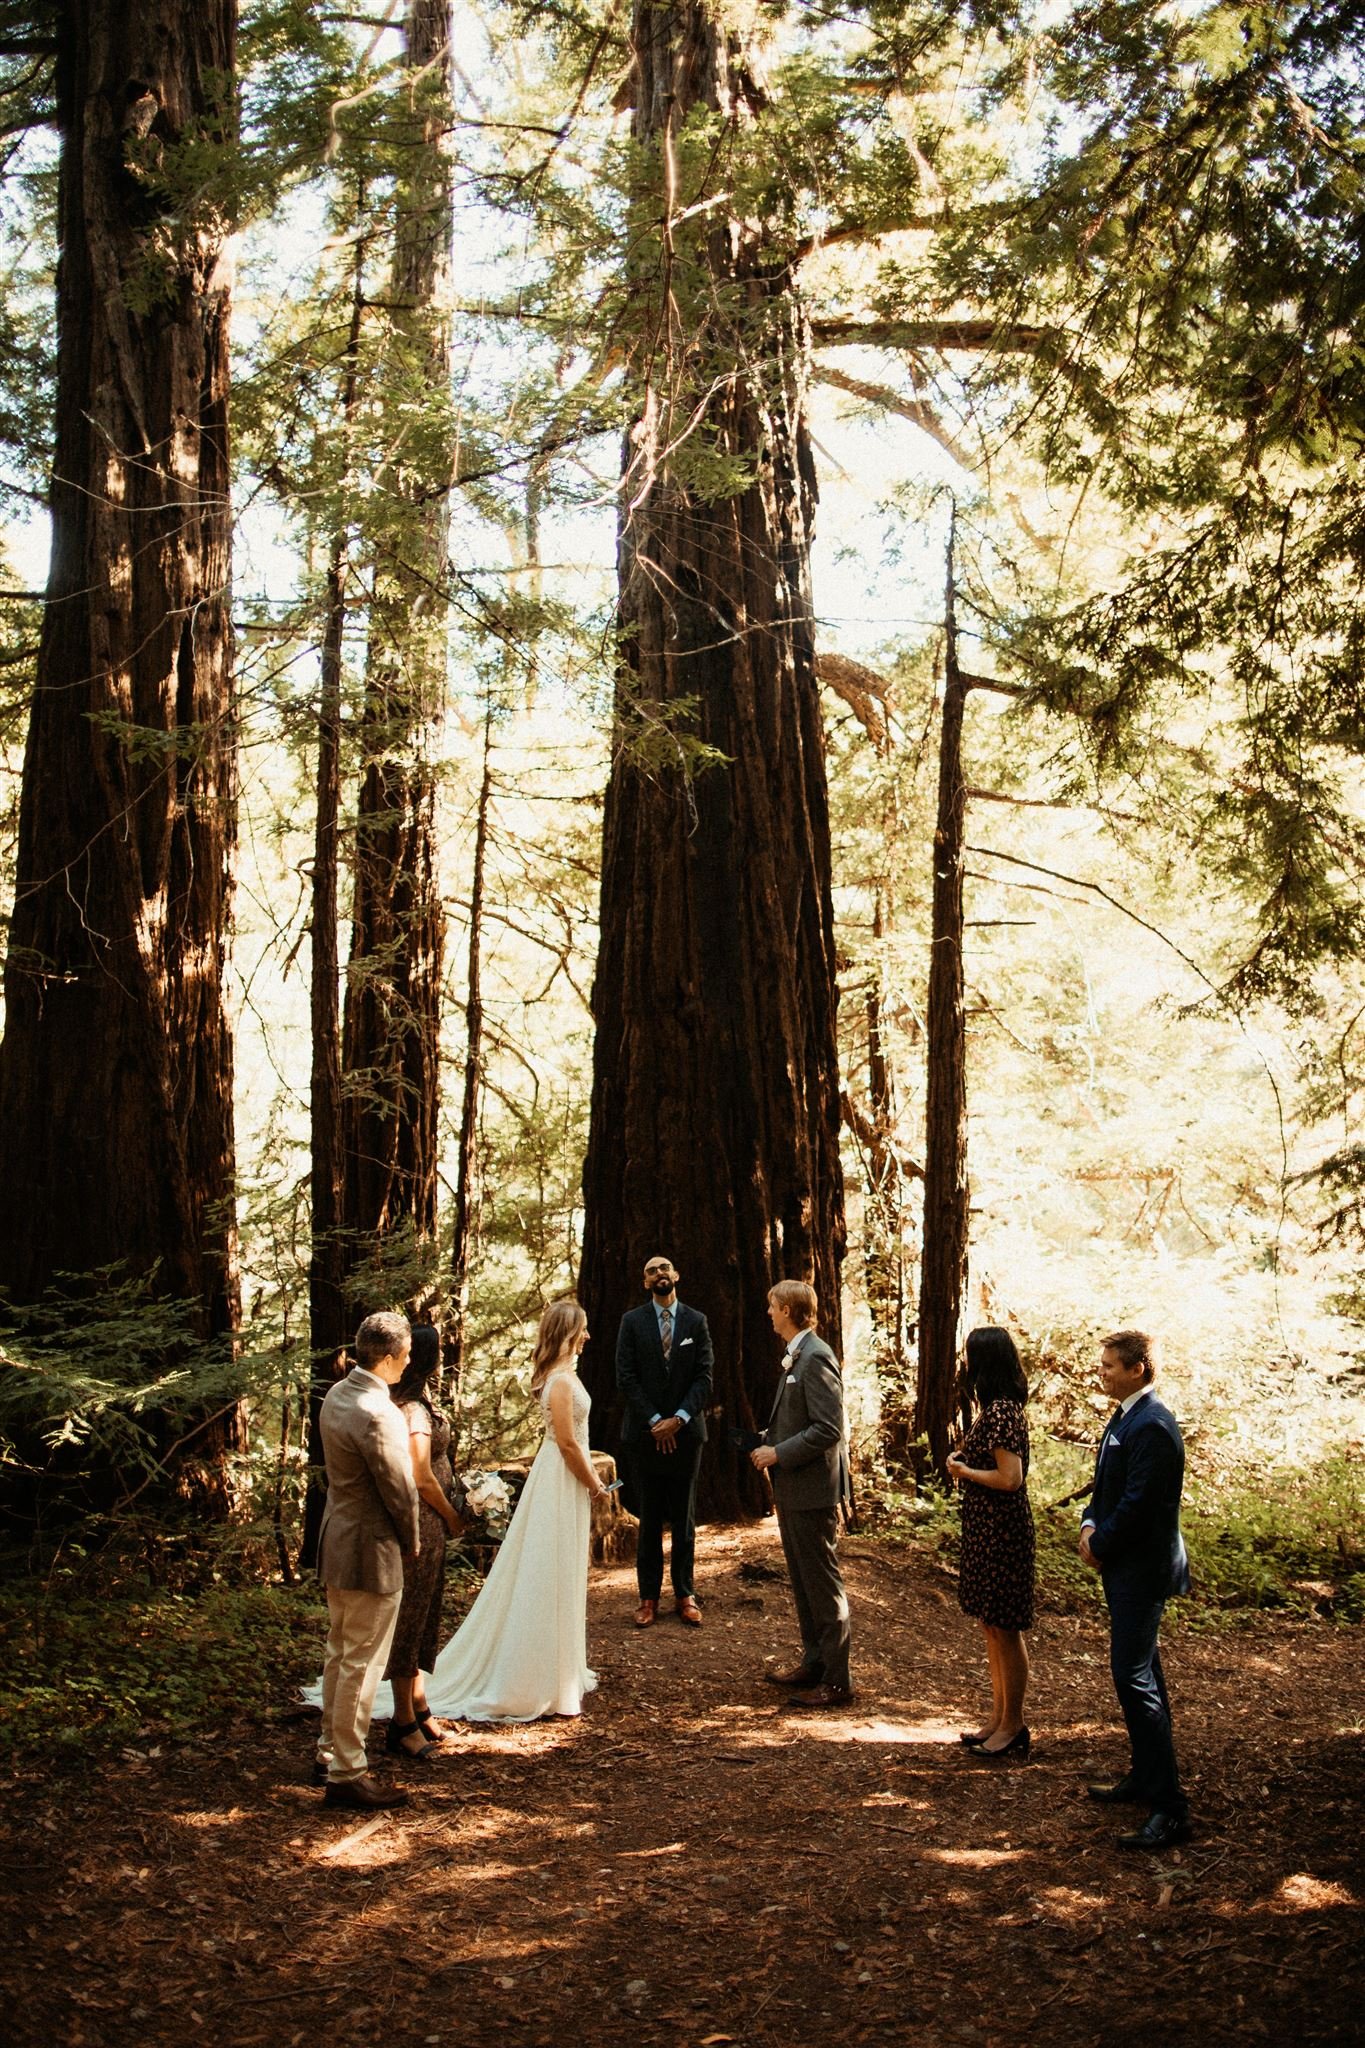 19-How-to-elope-in-Big-Sur-by-Will-Khoury.jpg